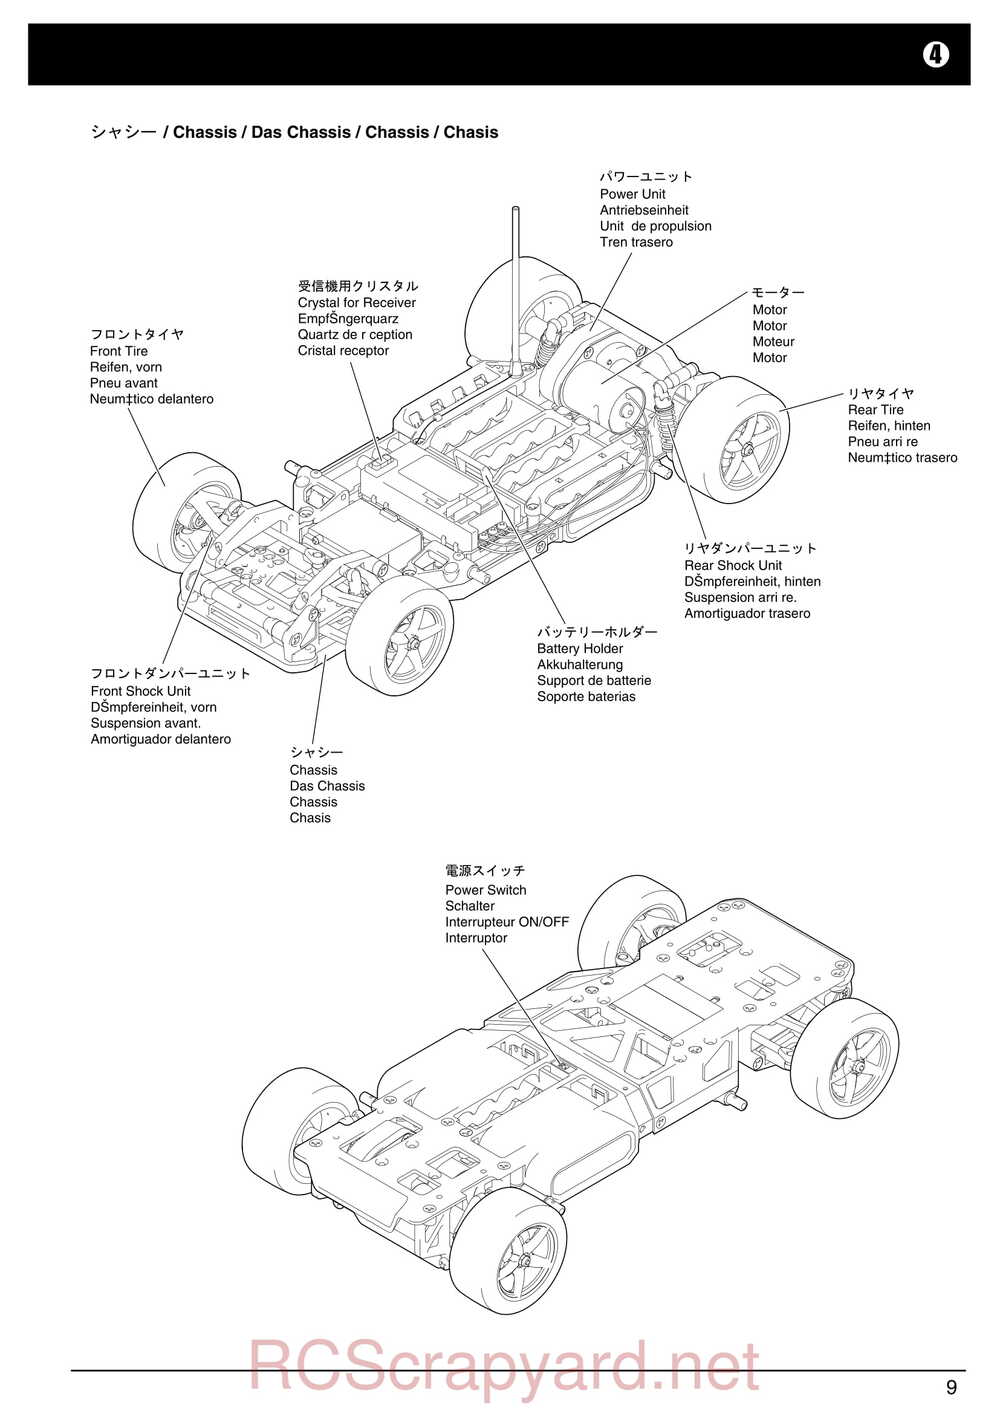 Kyosho - 30551 - a12 Sport - Manual - Page 09